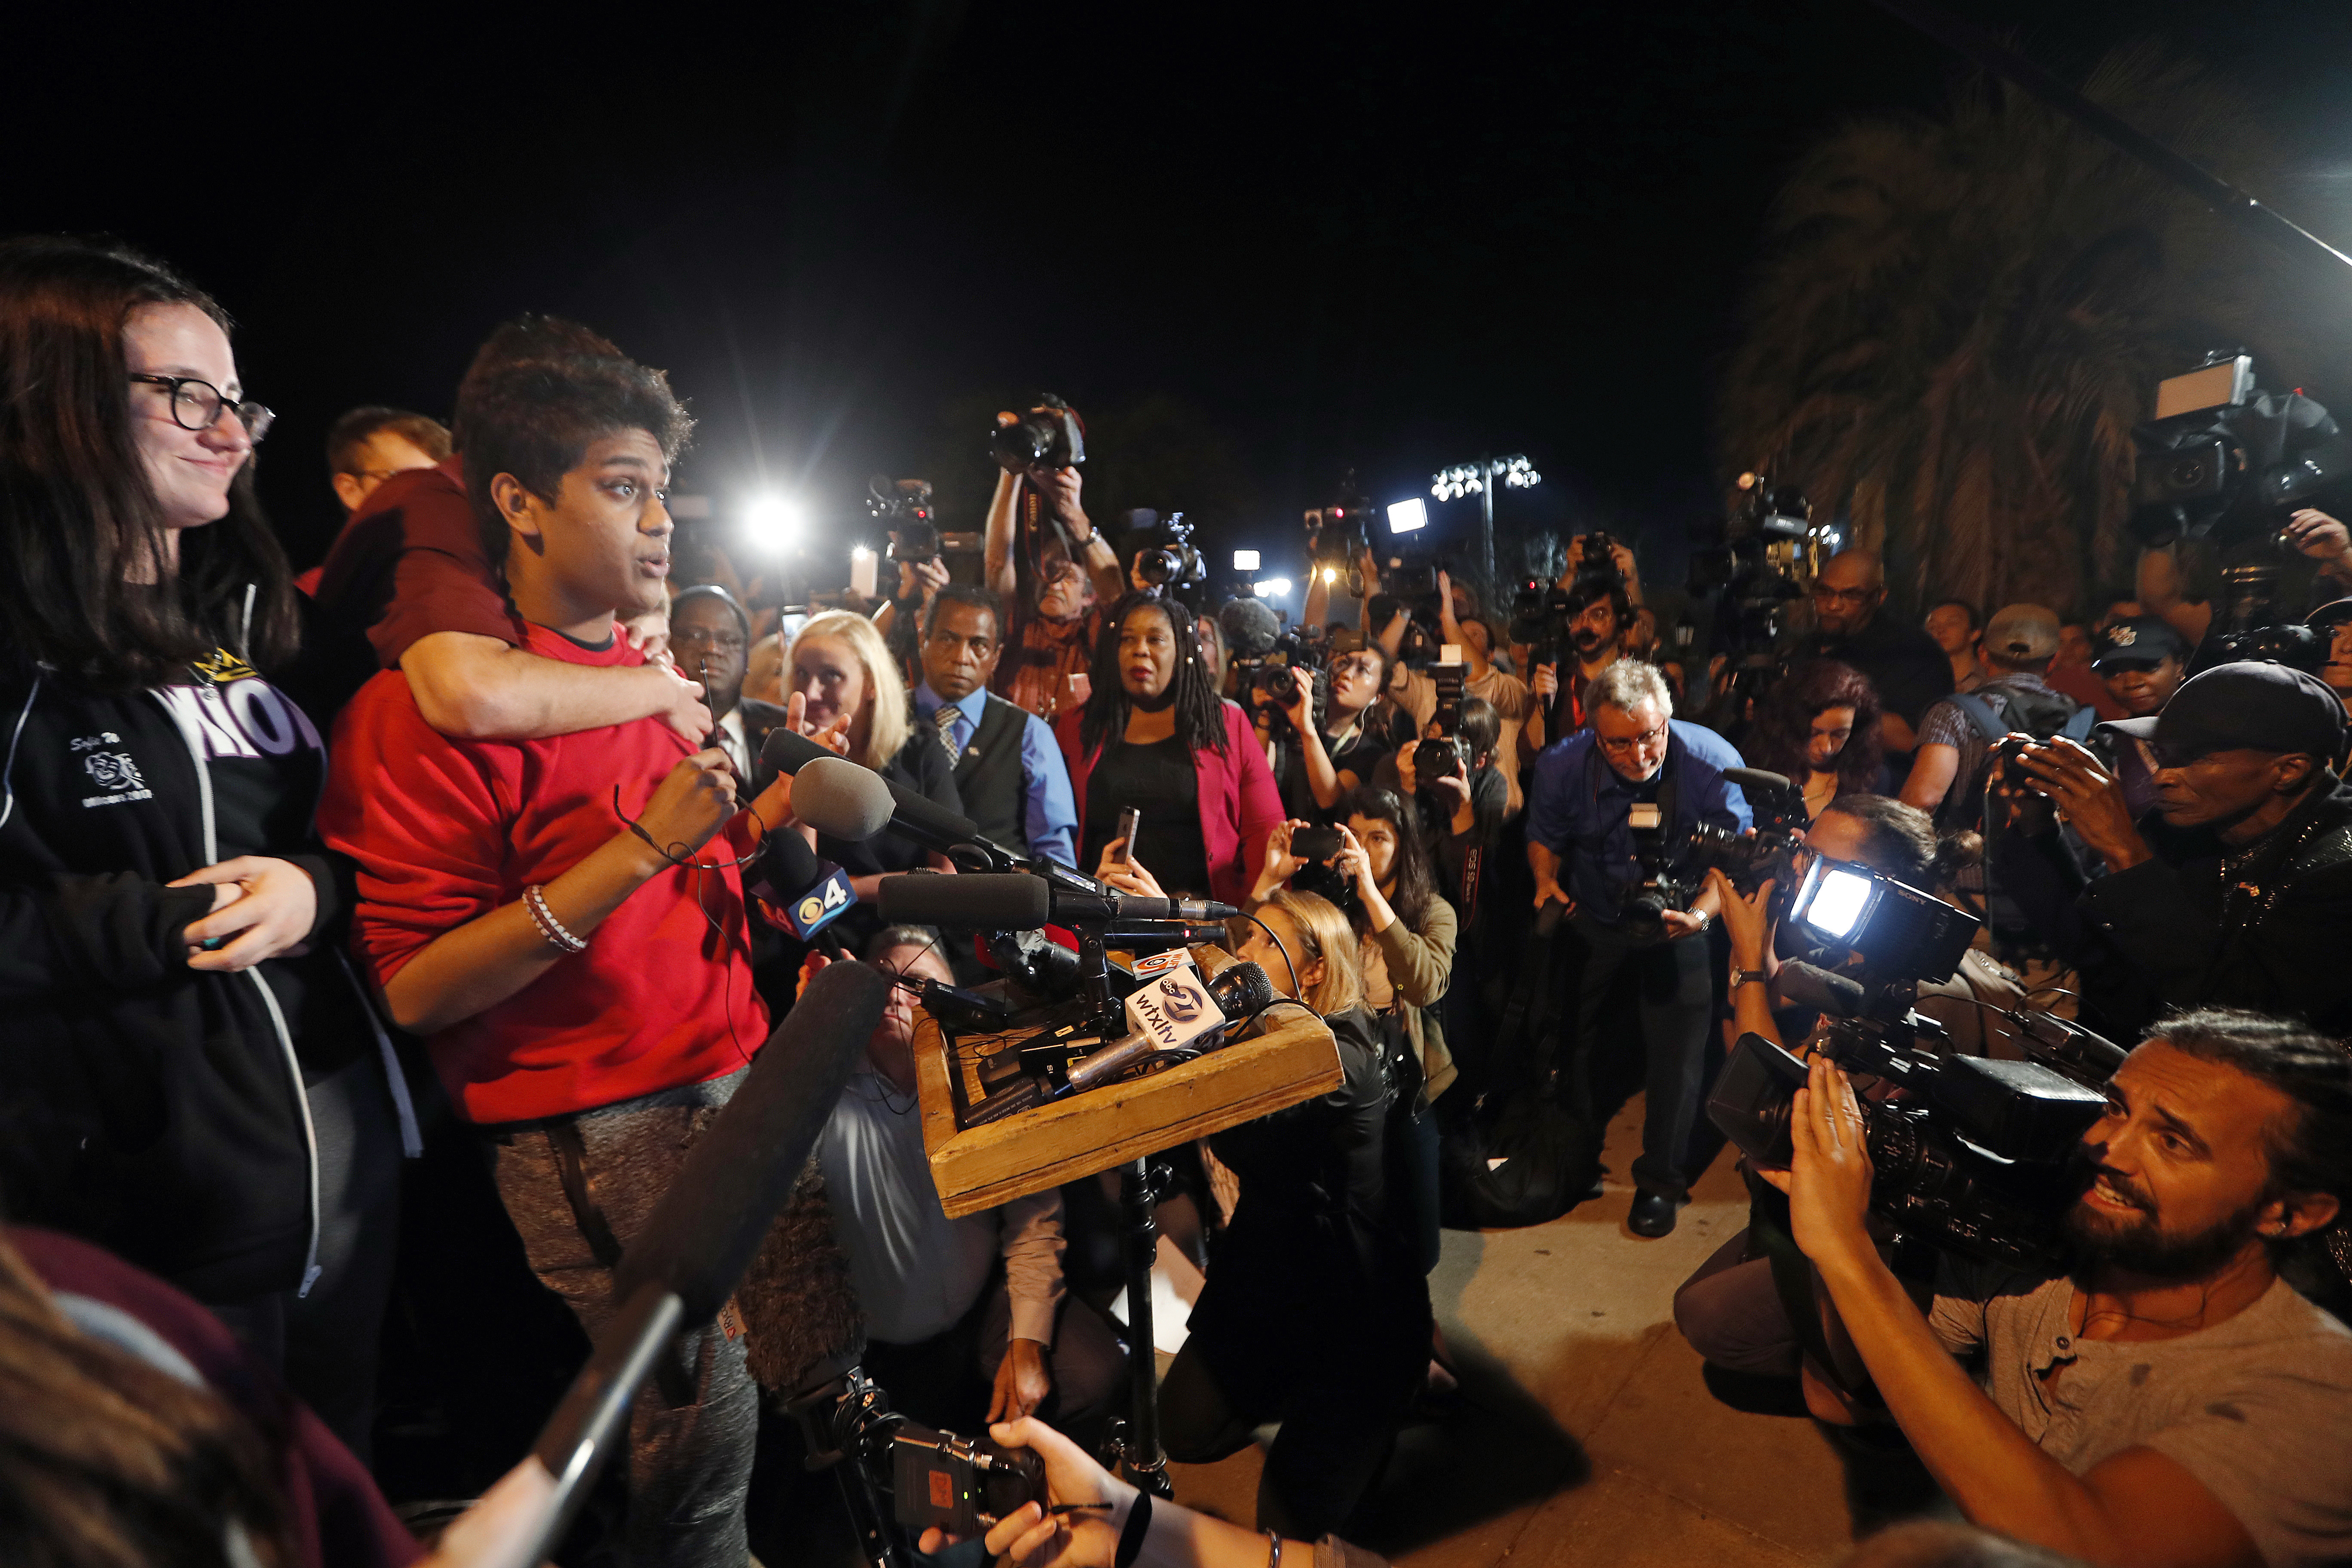 Tanzil Philip, 16, a student survivor from Marjory Stoneman Douglas High School, where 17 students and faculty were killed in a mass shooting on Wednesday, speaks to a crowd of supporters and media as they arrive at Leon High School, in Tallahassee, Fla., Tuesday, Feb. 20, 2018. The students arrived in the state's capital to talk to legislators and rally for gun control reform. (AP Photo/Gerald Herbert)